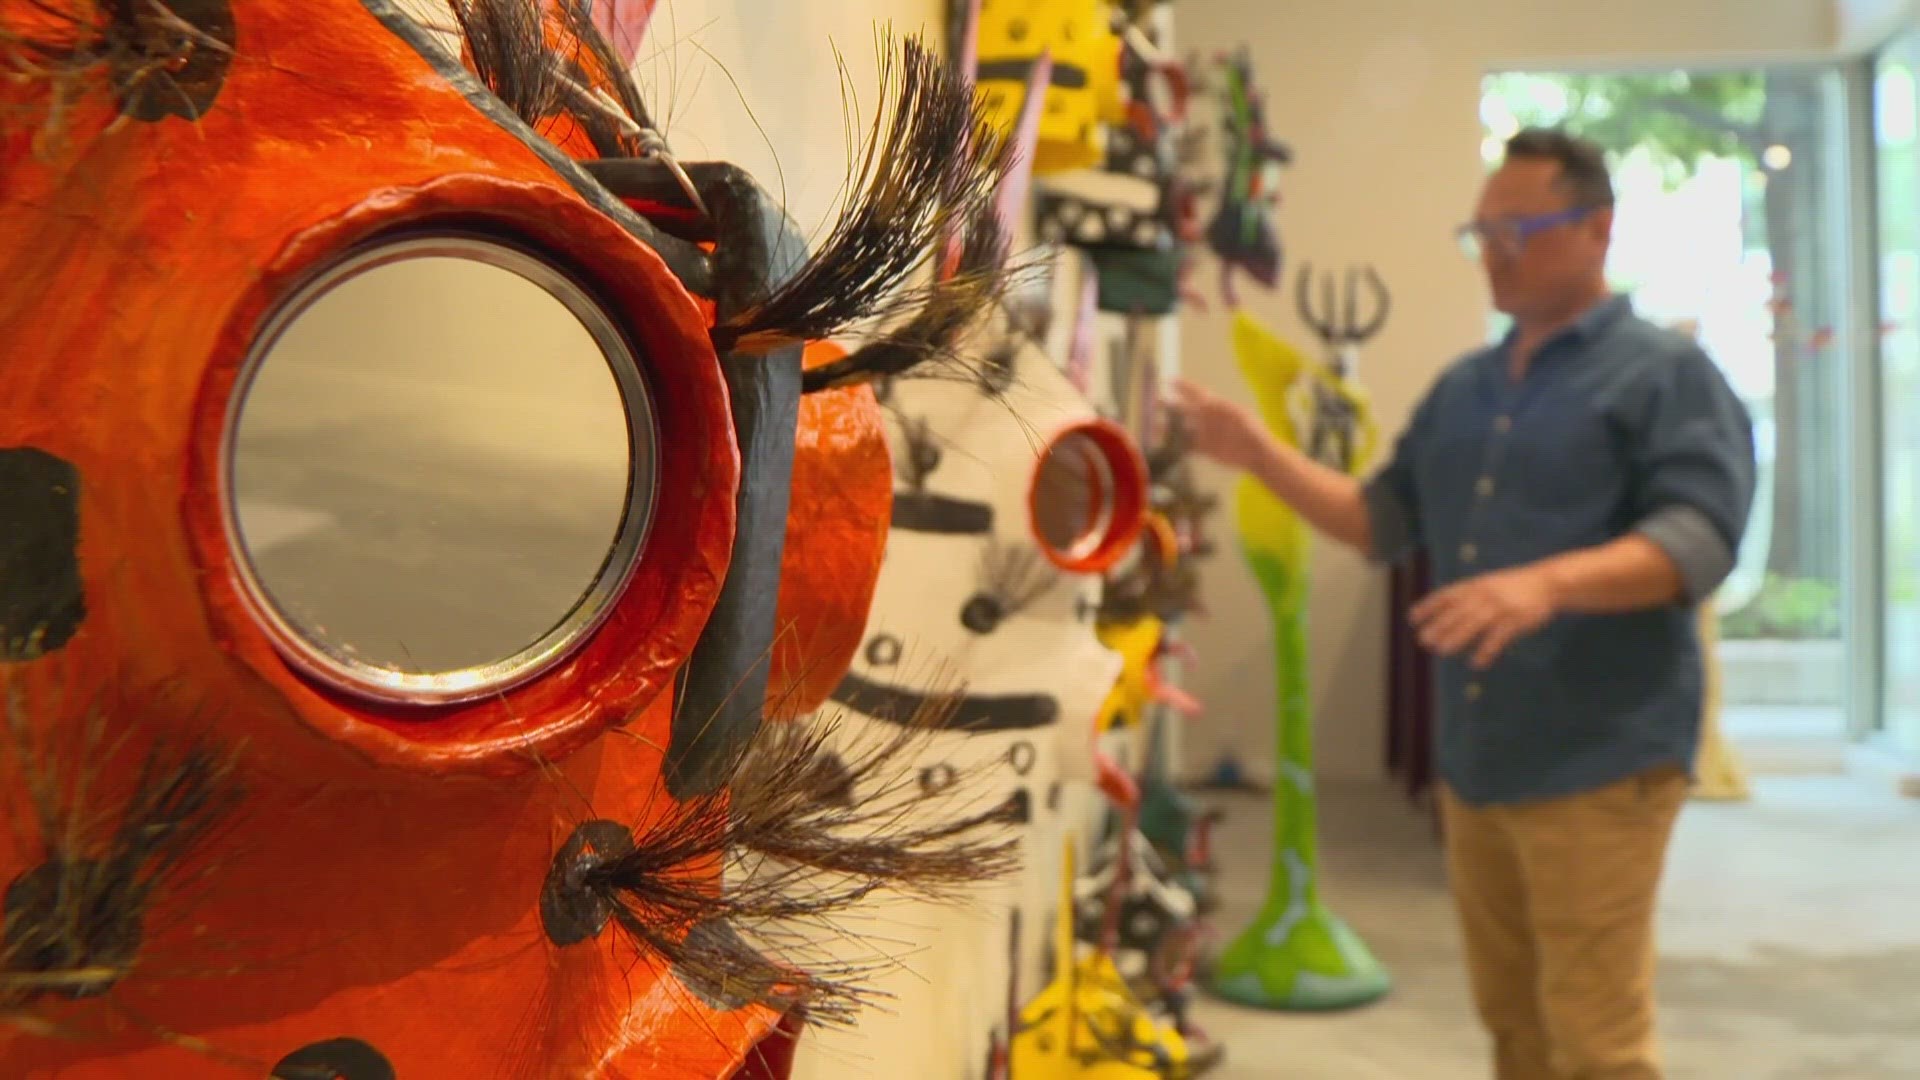 In his first solo exhibition, Miguel Martin's life-sized sculptures will be on display in Fort Worth's Sundance Square.